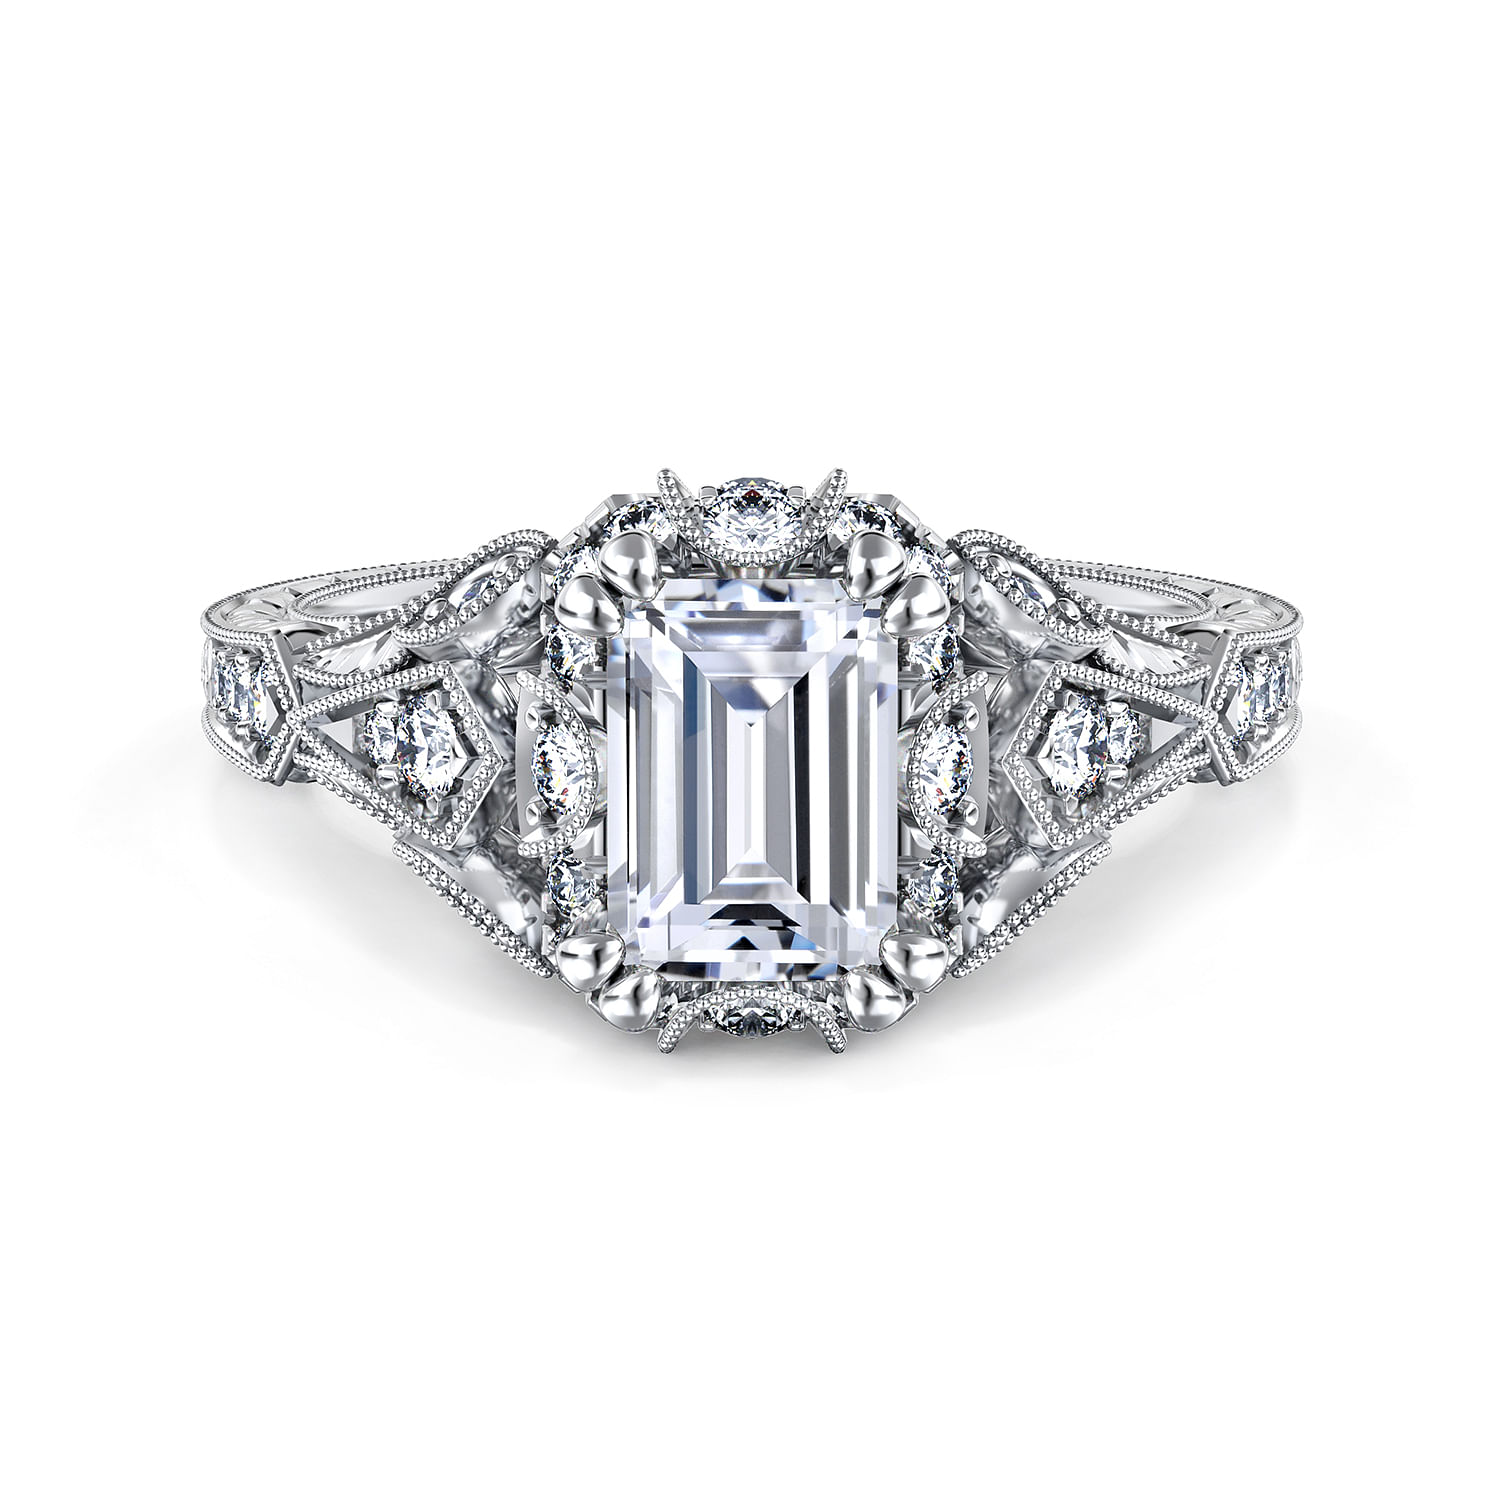 Annadale - Unique 14K White Gold Vintage Inspired Emerald Cut Diamond Halo Engagement Ring